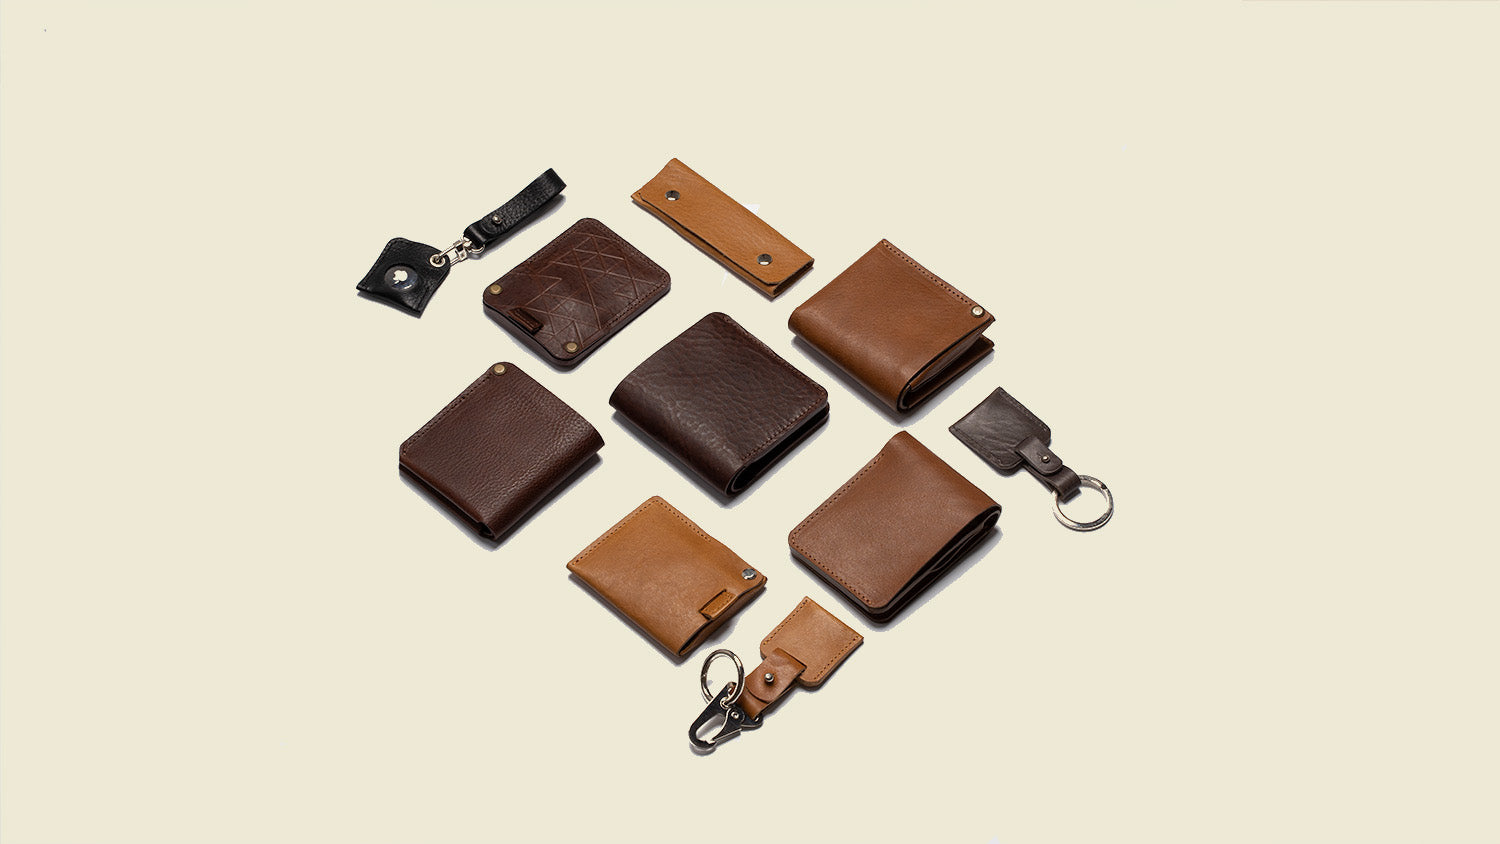 Men's and Women's AirTag Wallets and Accessories made in the EU from premium Italian Leather by Geometric Goods